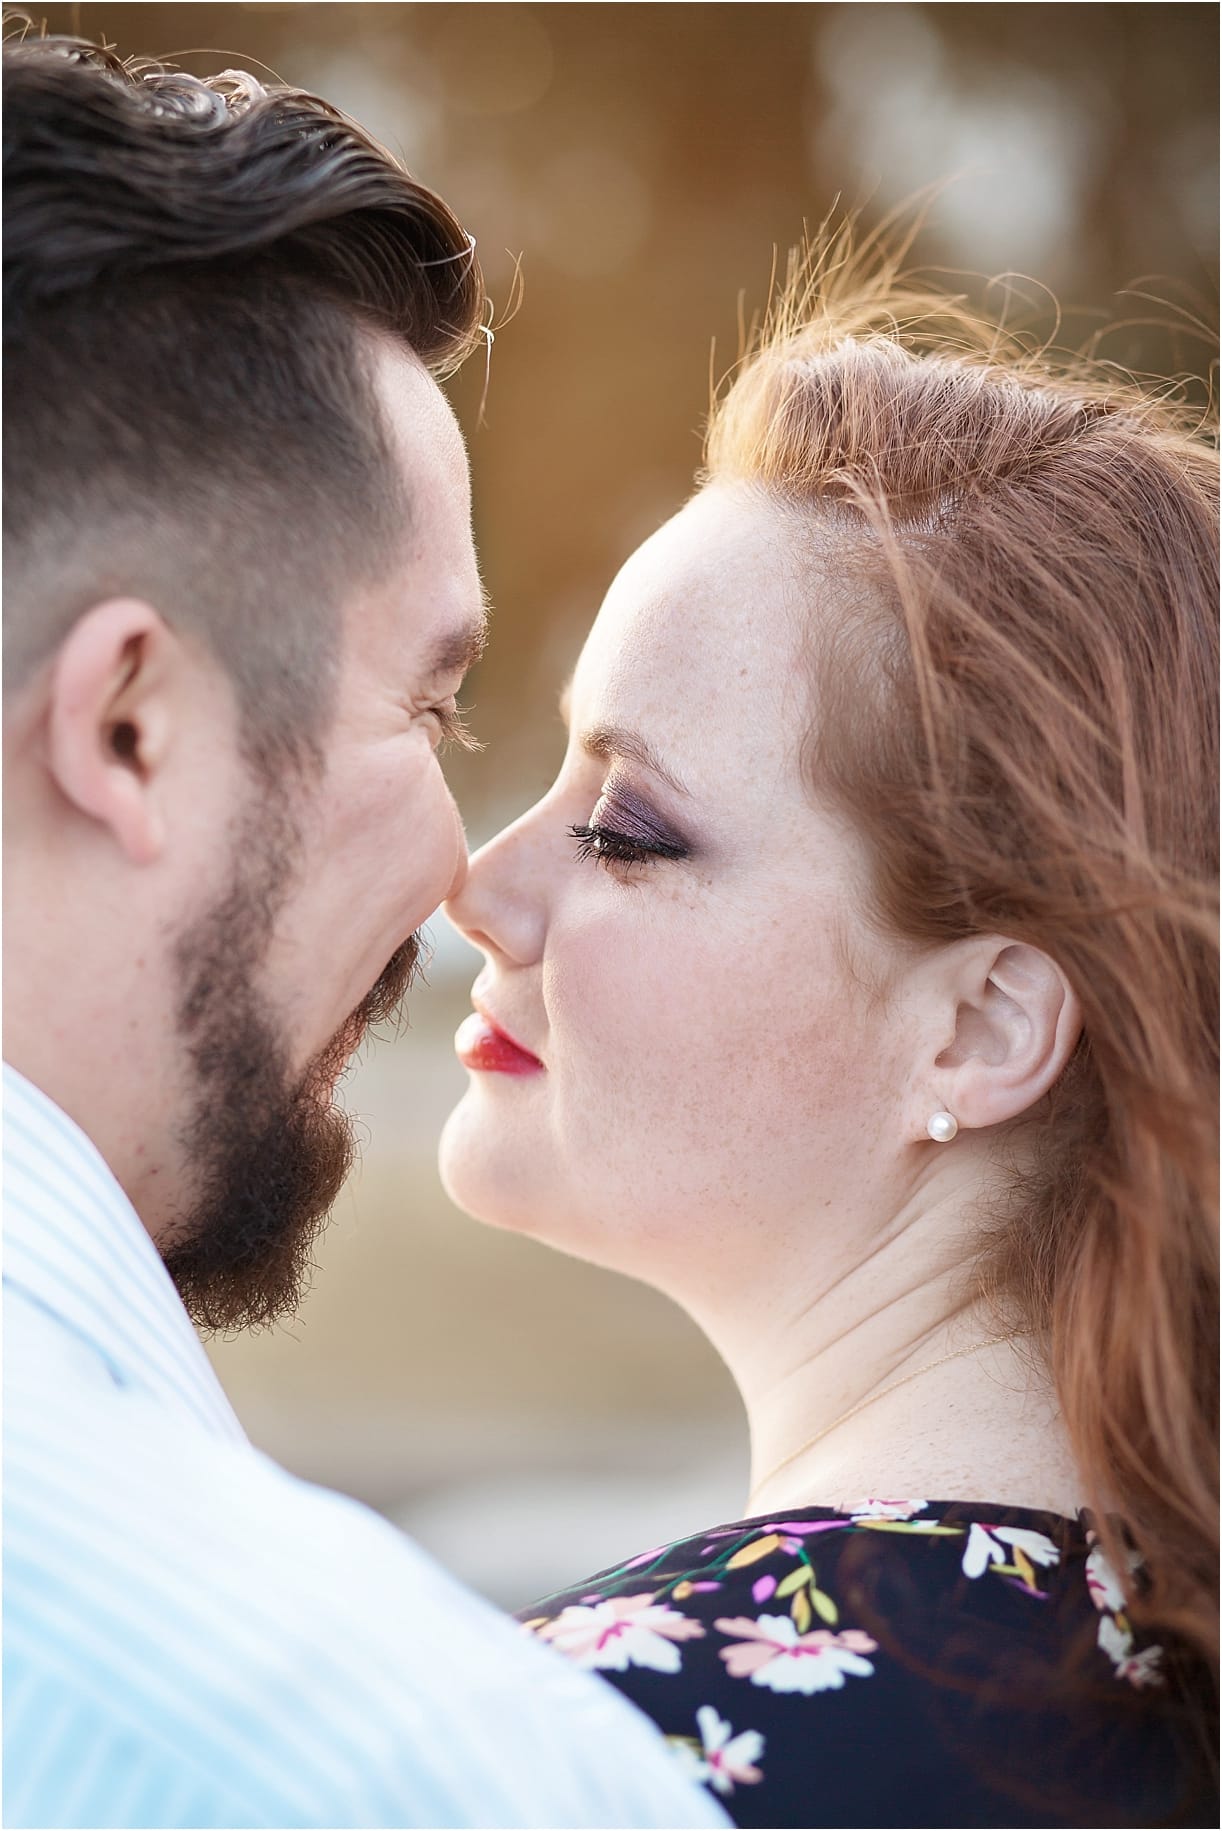 Norfolk Irish Pub Engagement Session as seen on Hill City Bride Virginia Wedding Blog by Laura Sue Brod Photography